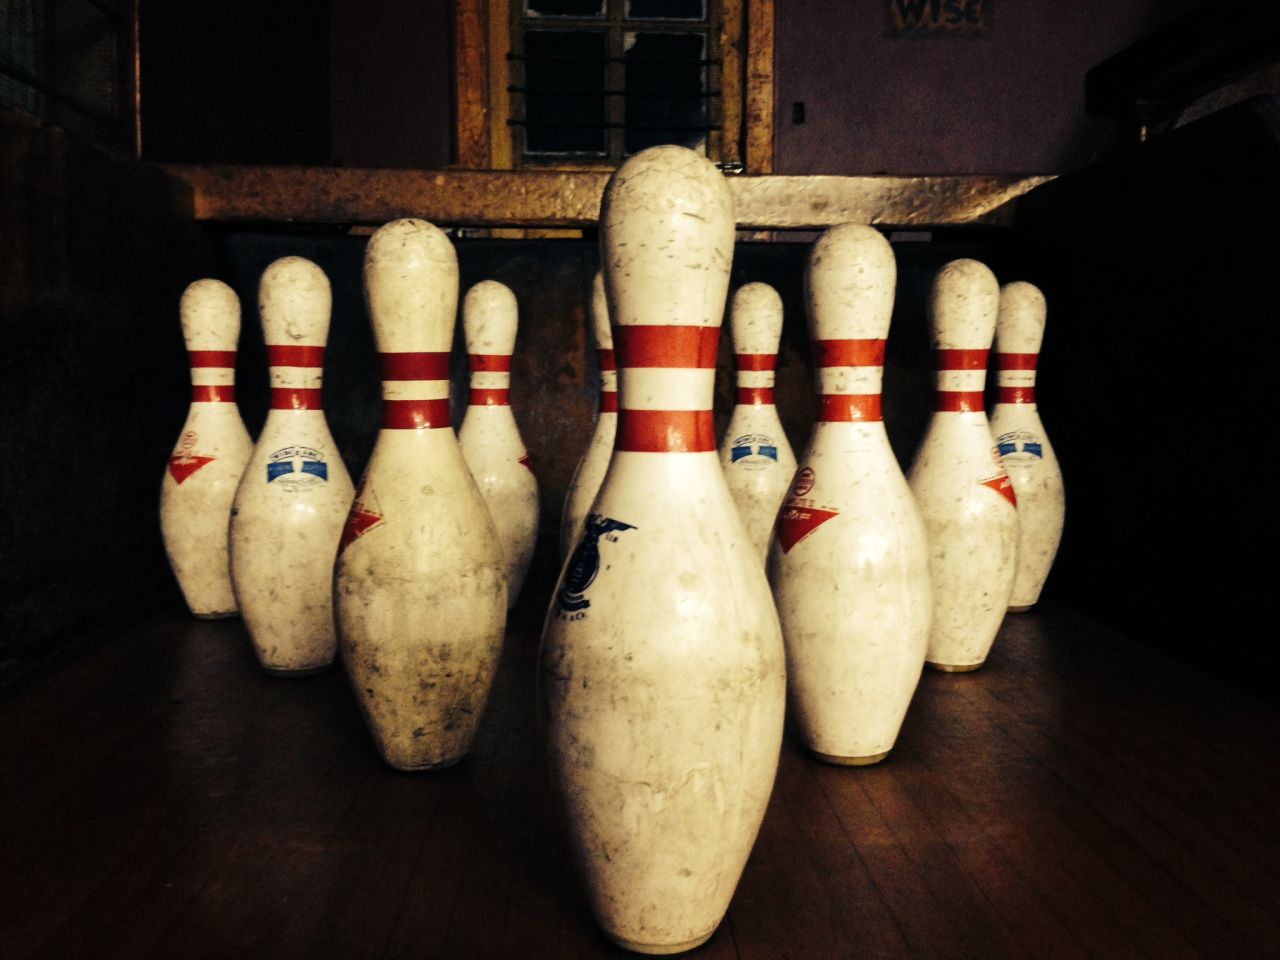 The bowling alley at Rohman's Inn and Pub dates back to 1941. The alley is housed in what was once the Shohola Glen Hotel. 